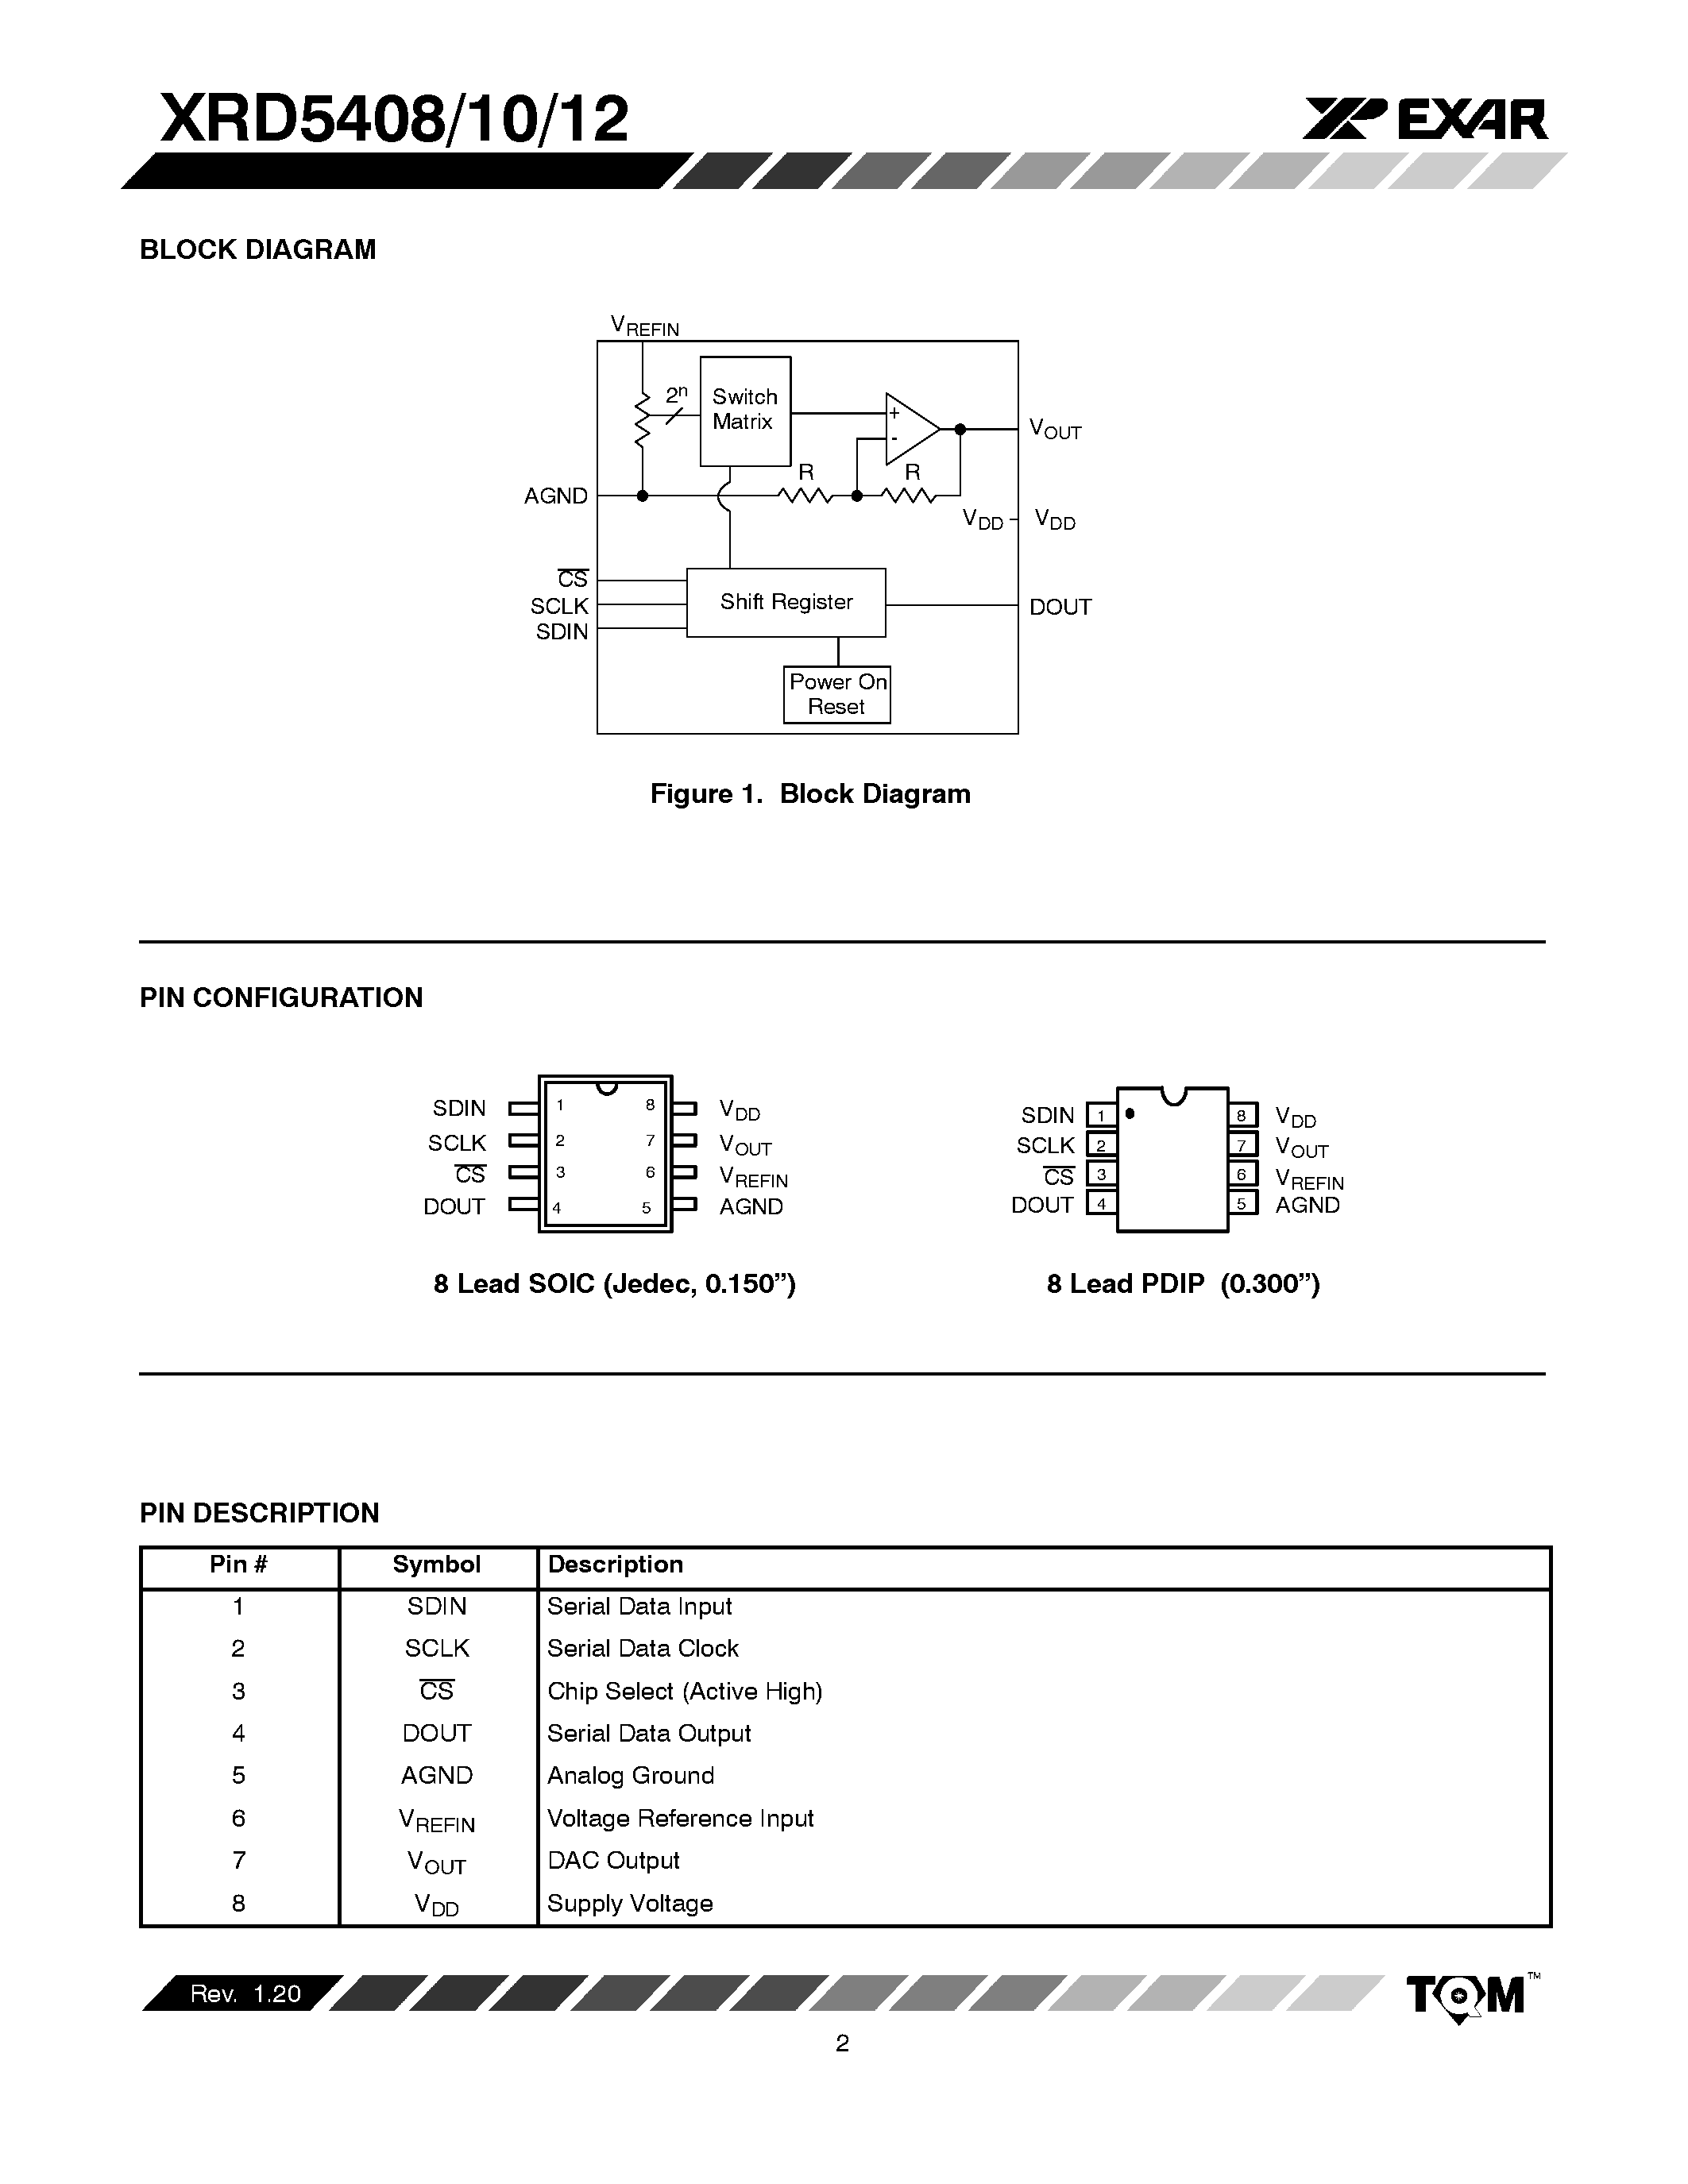 Datasheet XRD5412 - 5V/ Low Power/ Voltage Output Serial 8/10/12-Bit DAC Family page 2